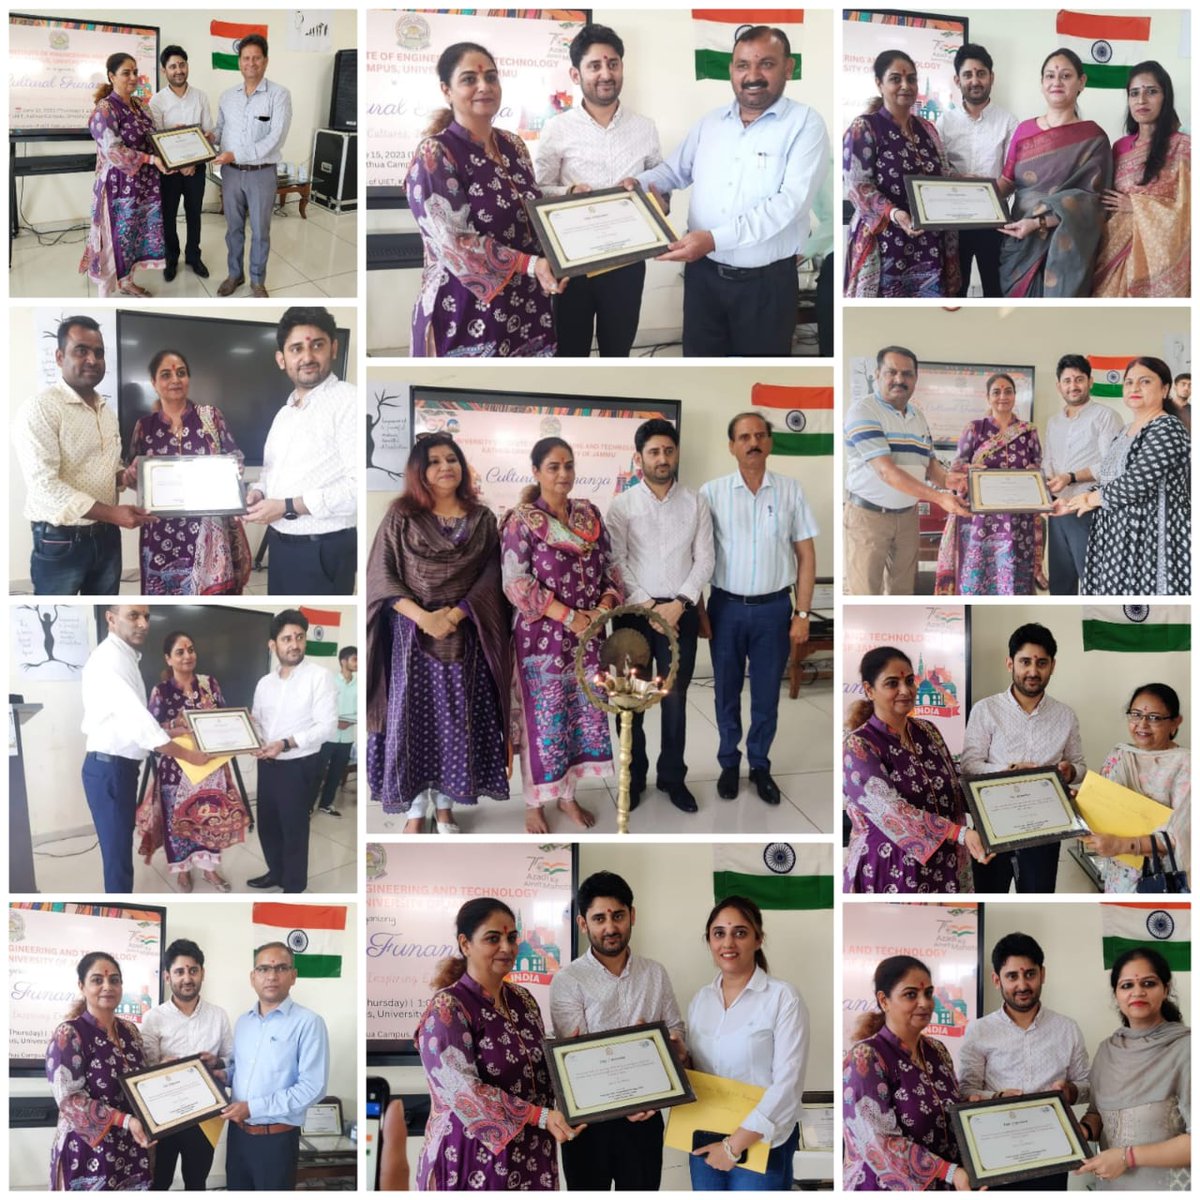 ...some more glimpses of academic leaders of kathua being honoured